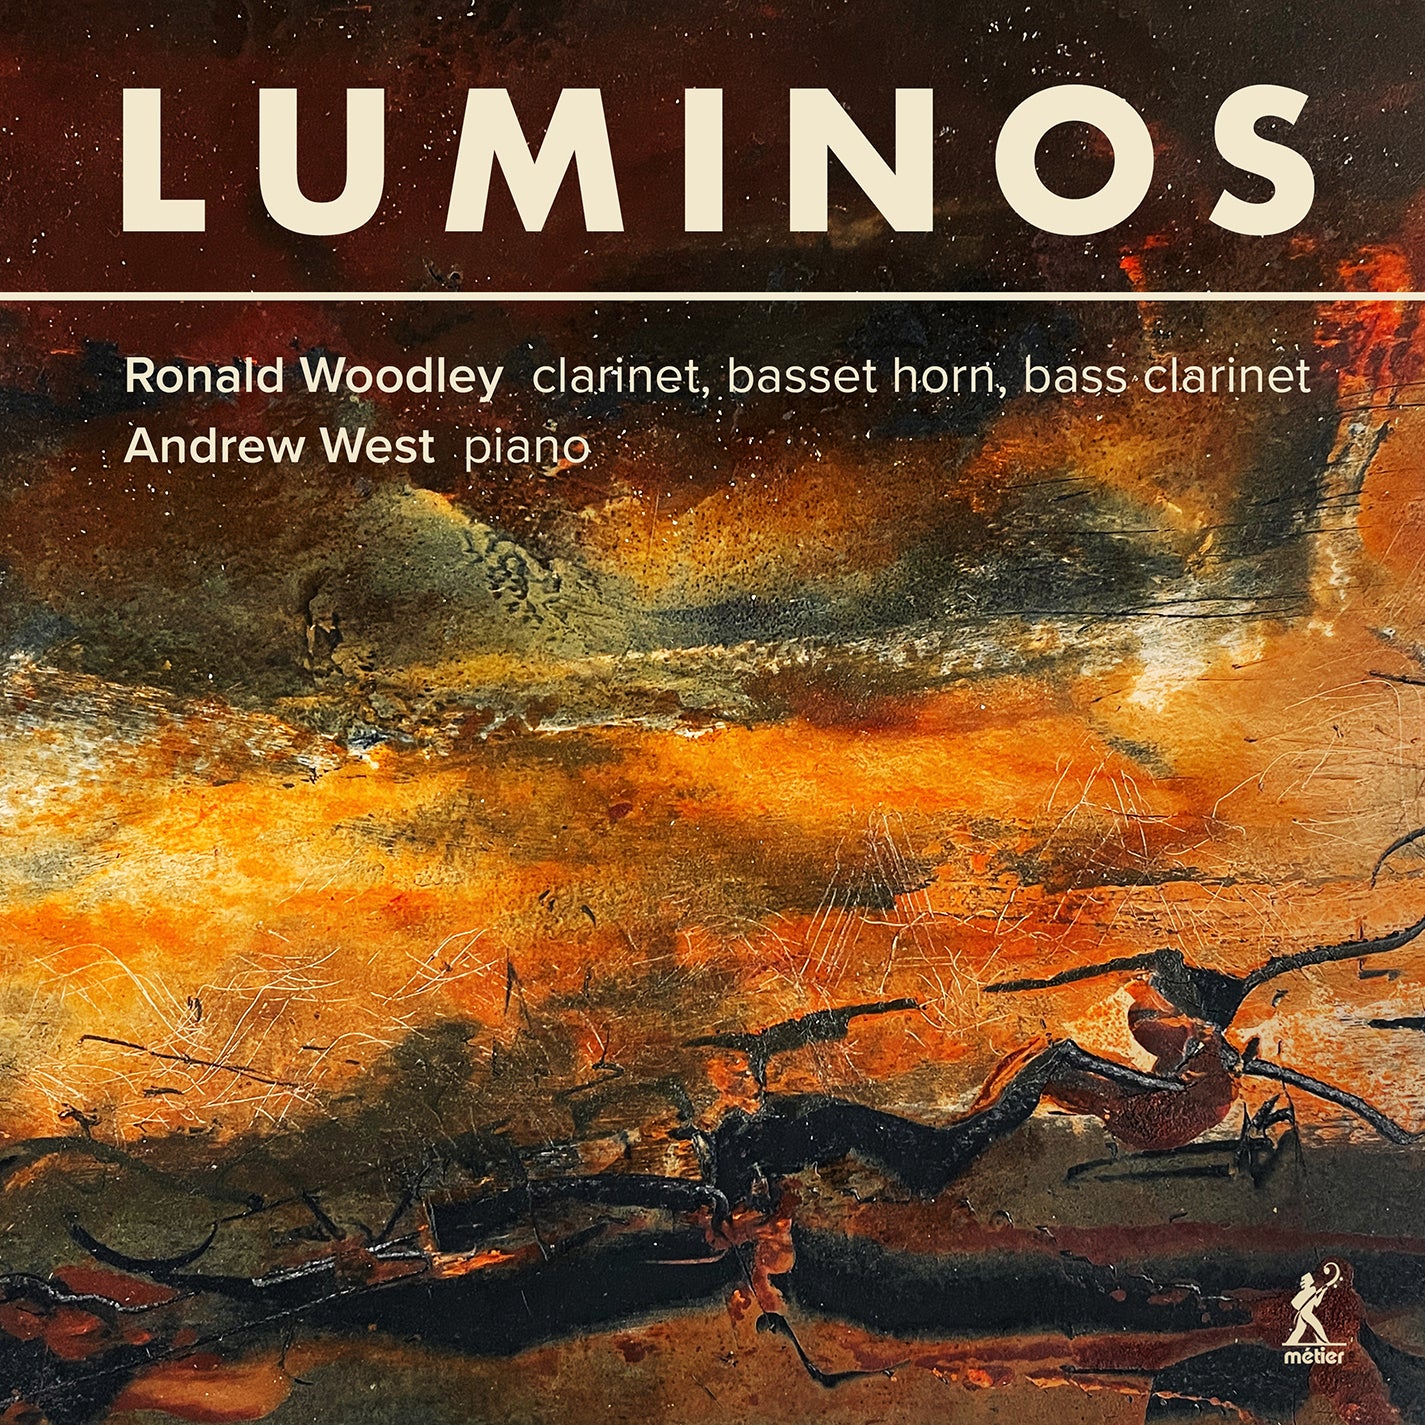 Luminos - Contemporary Music for Clarinet / Woodley, West